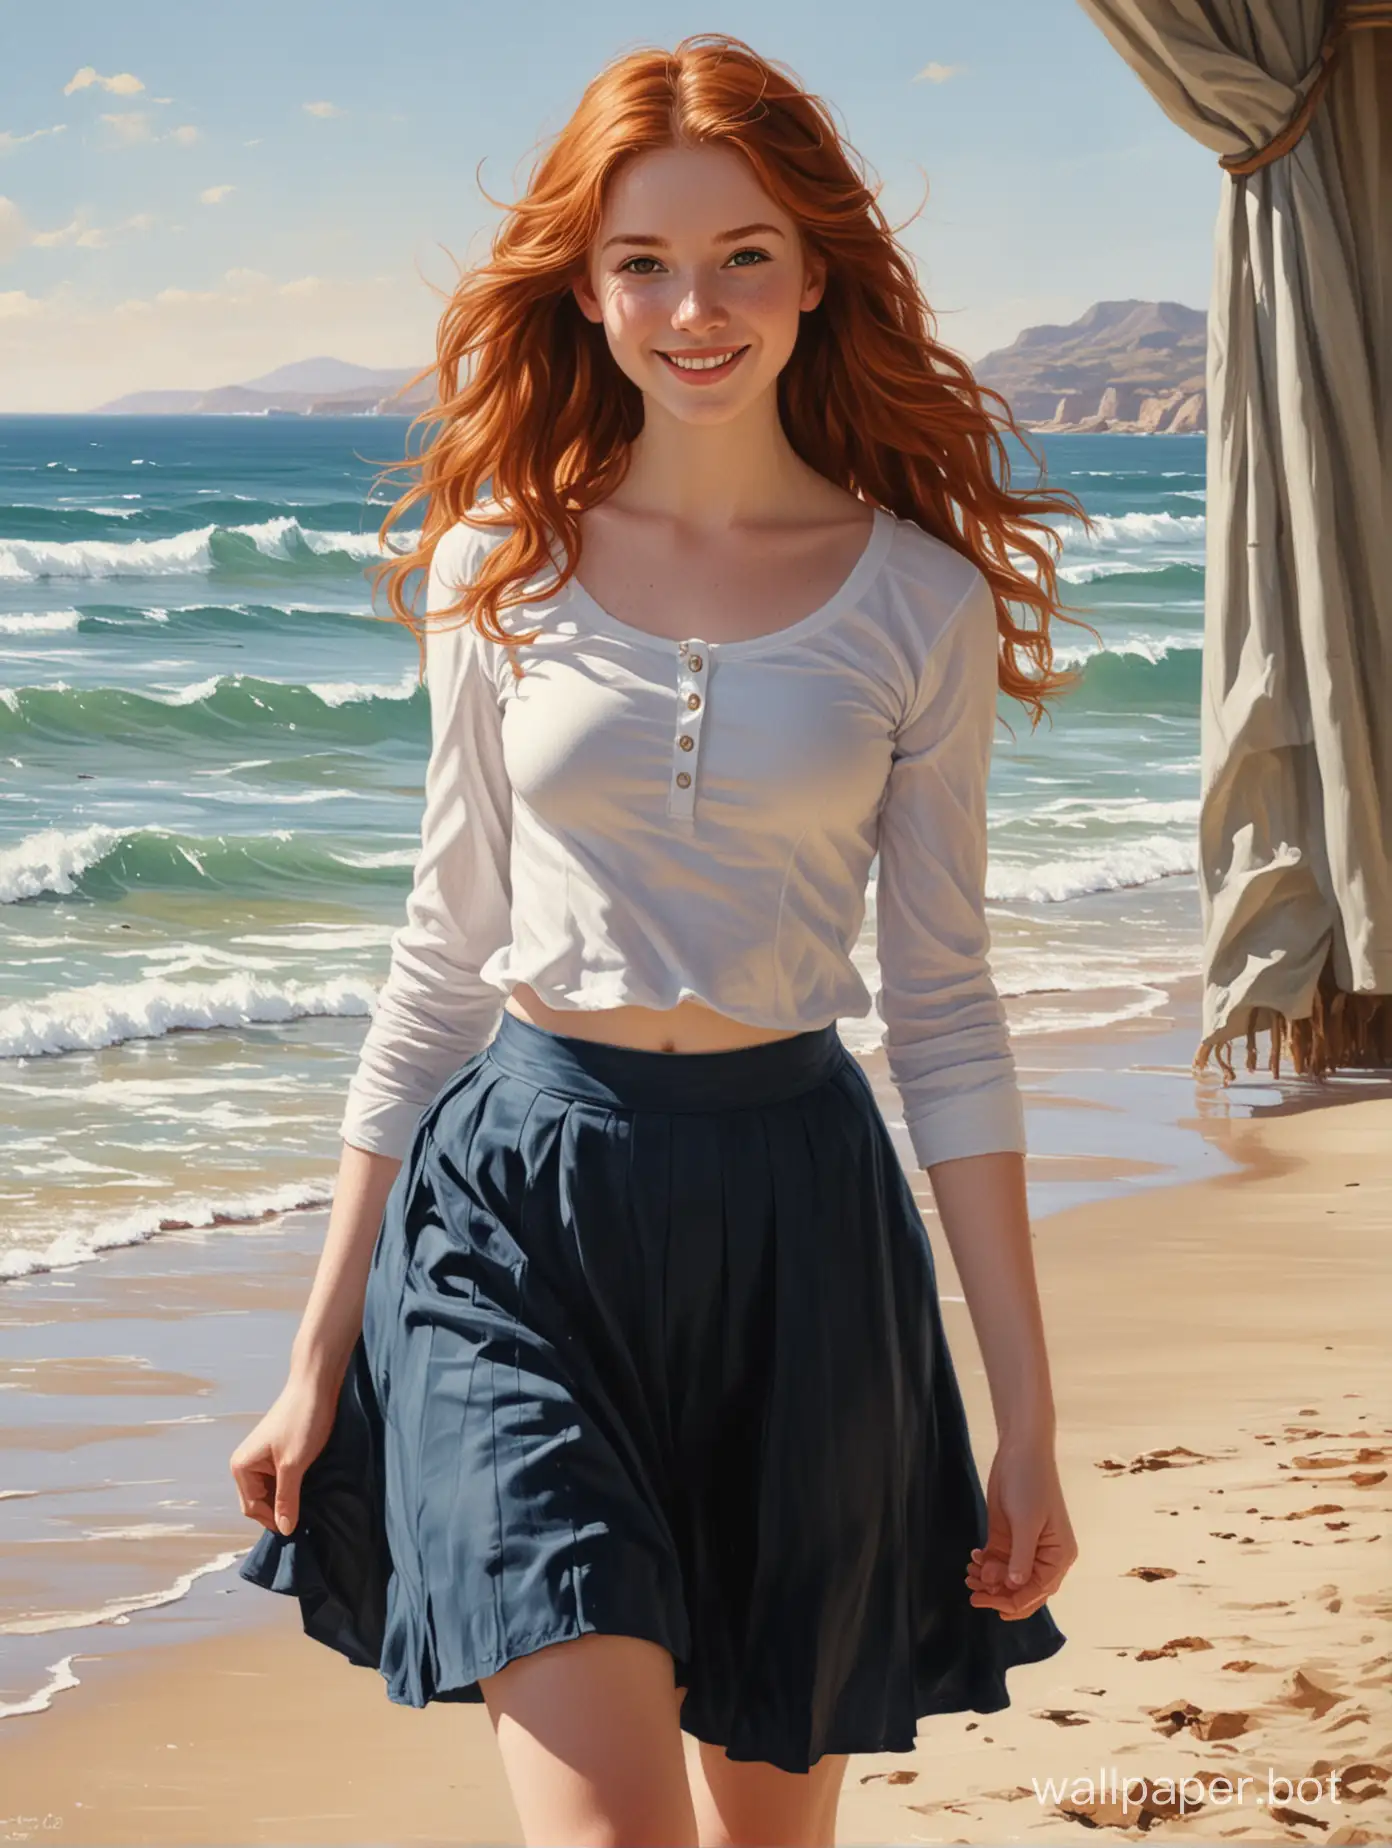 full body perspective, low angle painting of an adorable 18 year old redhead teen walking on the beach, she is pretty, she has green eyes, she has pale skin, she has lots of freckles, she has long light red hair that is wavy and parted in the middle and falls in curtains, wearing a white top, midriff, six-pack abs, wearing a dark blue ankle-length skirt, she has a beautiful innocent face, smiling, beaming, very cute, perfect, sense of wonder, Velazquez painting style 